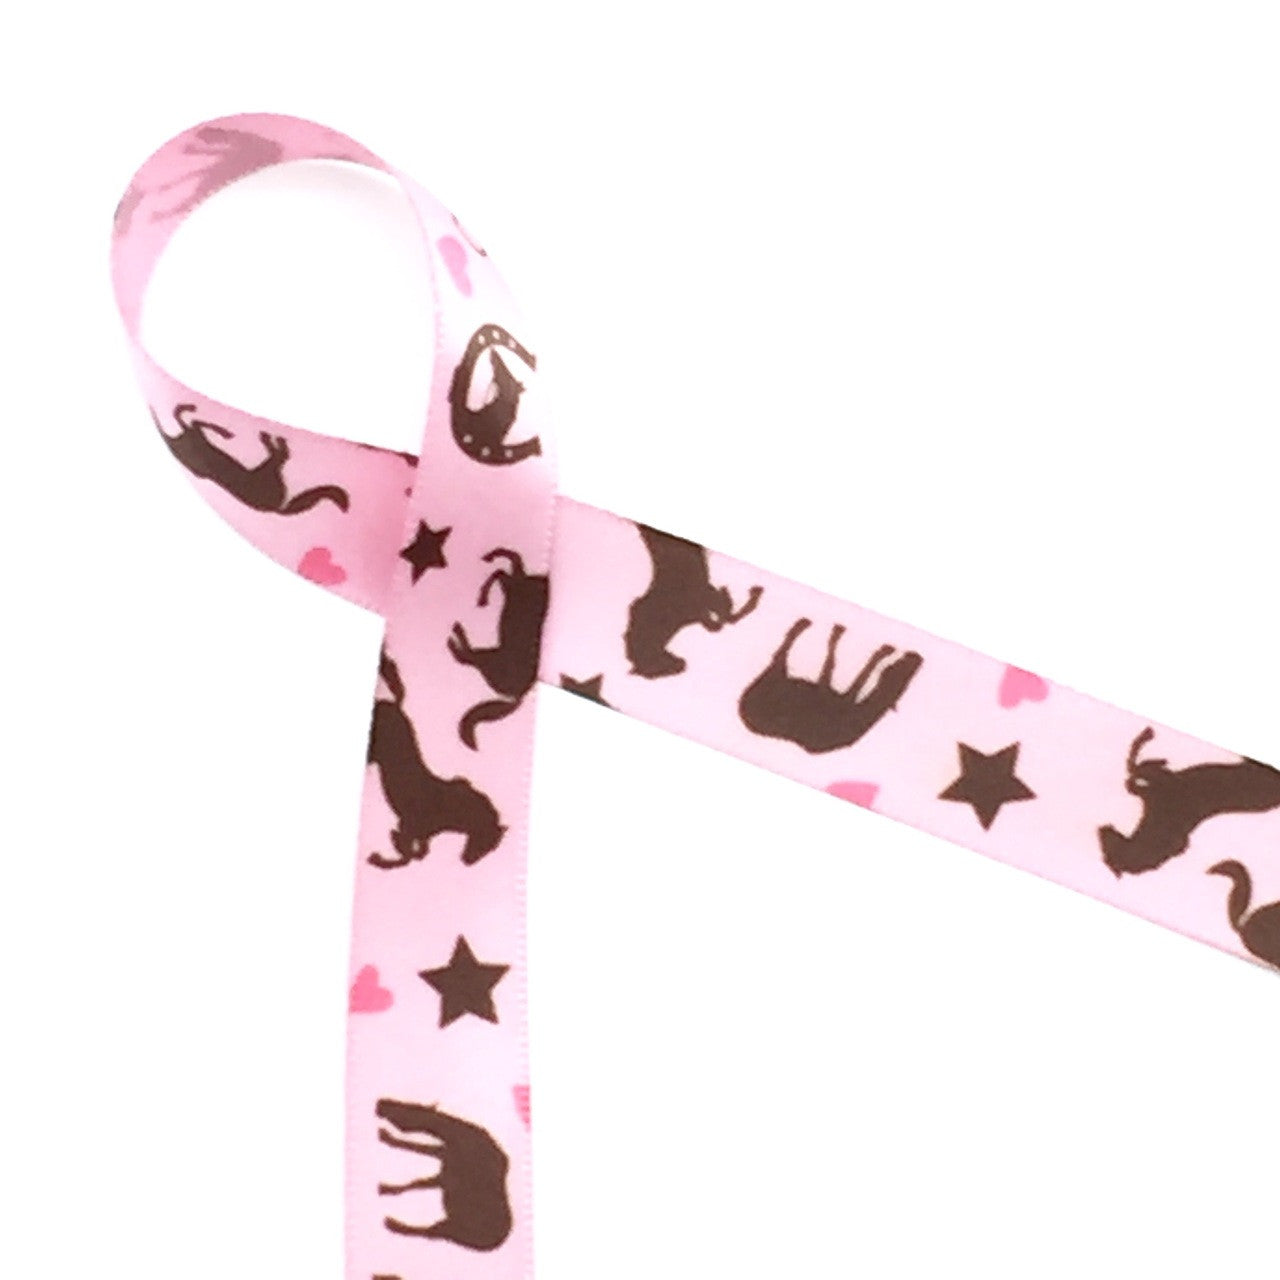 Brown horses with bits, horseshoes, stars and hearts on pink 5/8" ribbon! Perfect for any horse themed party favor!